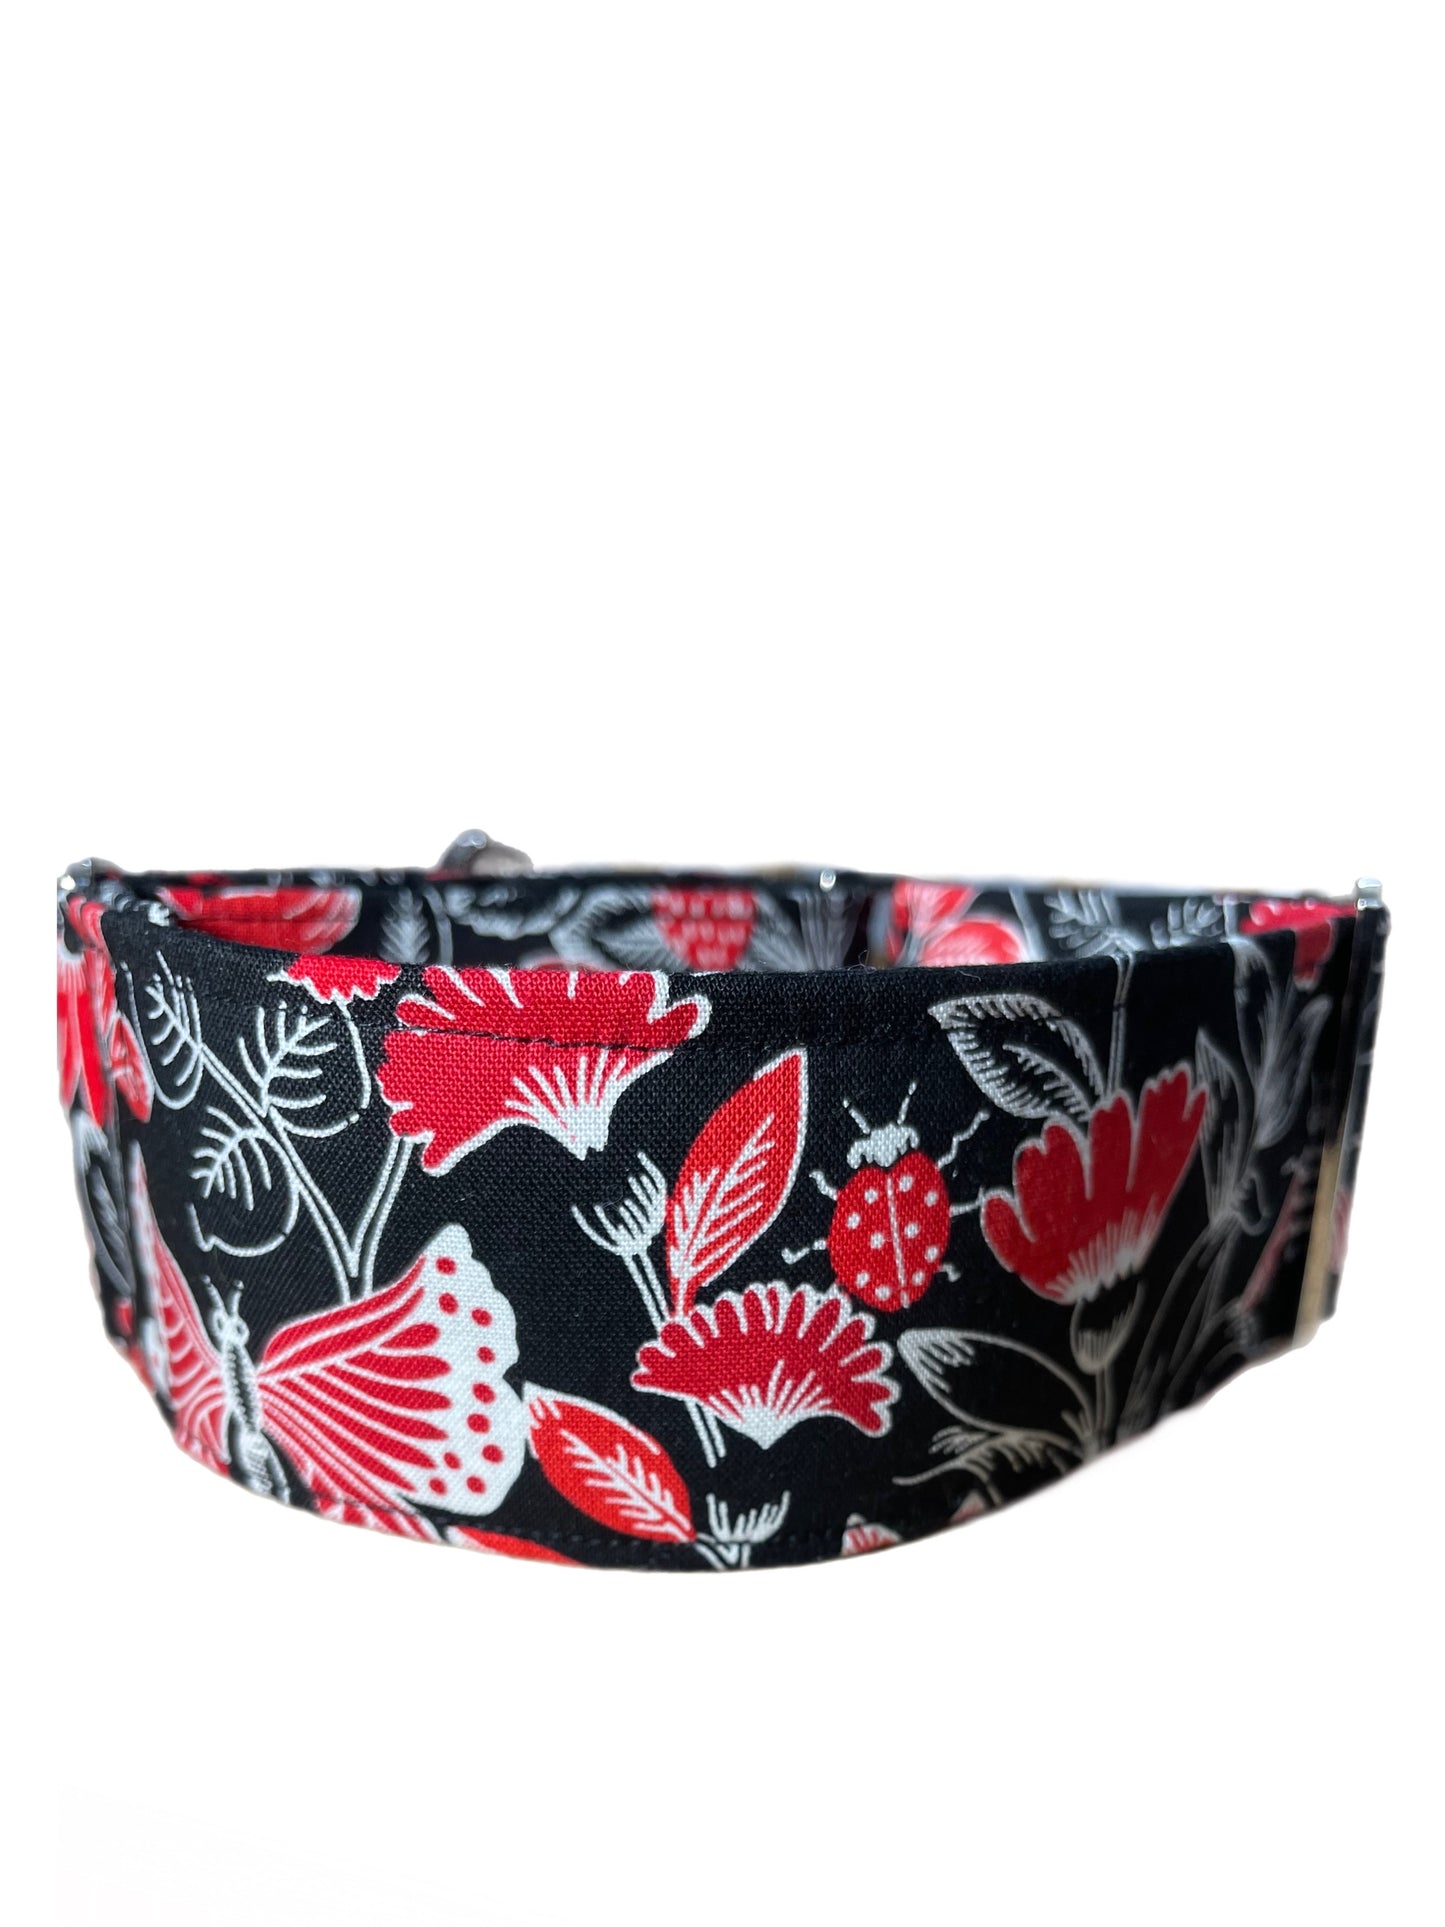 Butterflies in black red and white greyhound Martingale collar cotton covered 50mm width